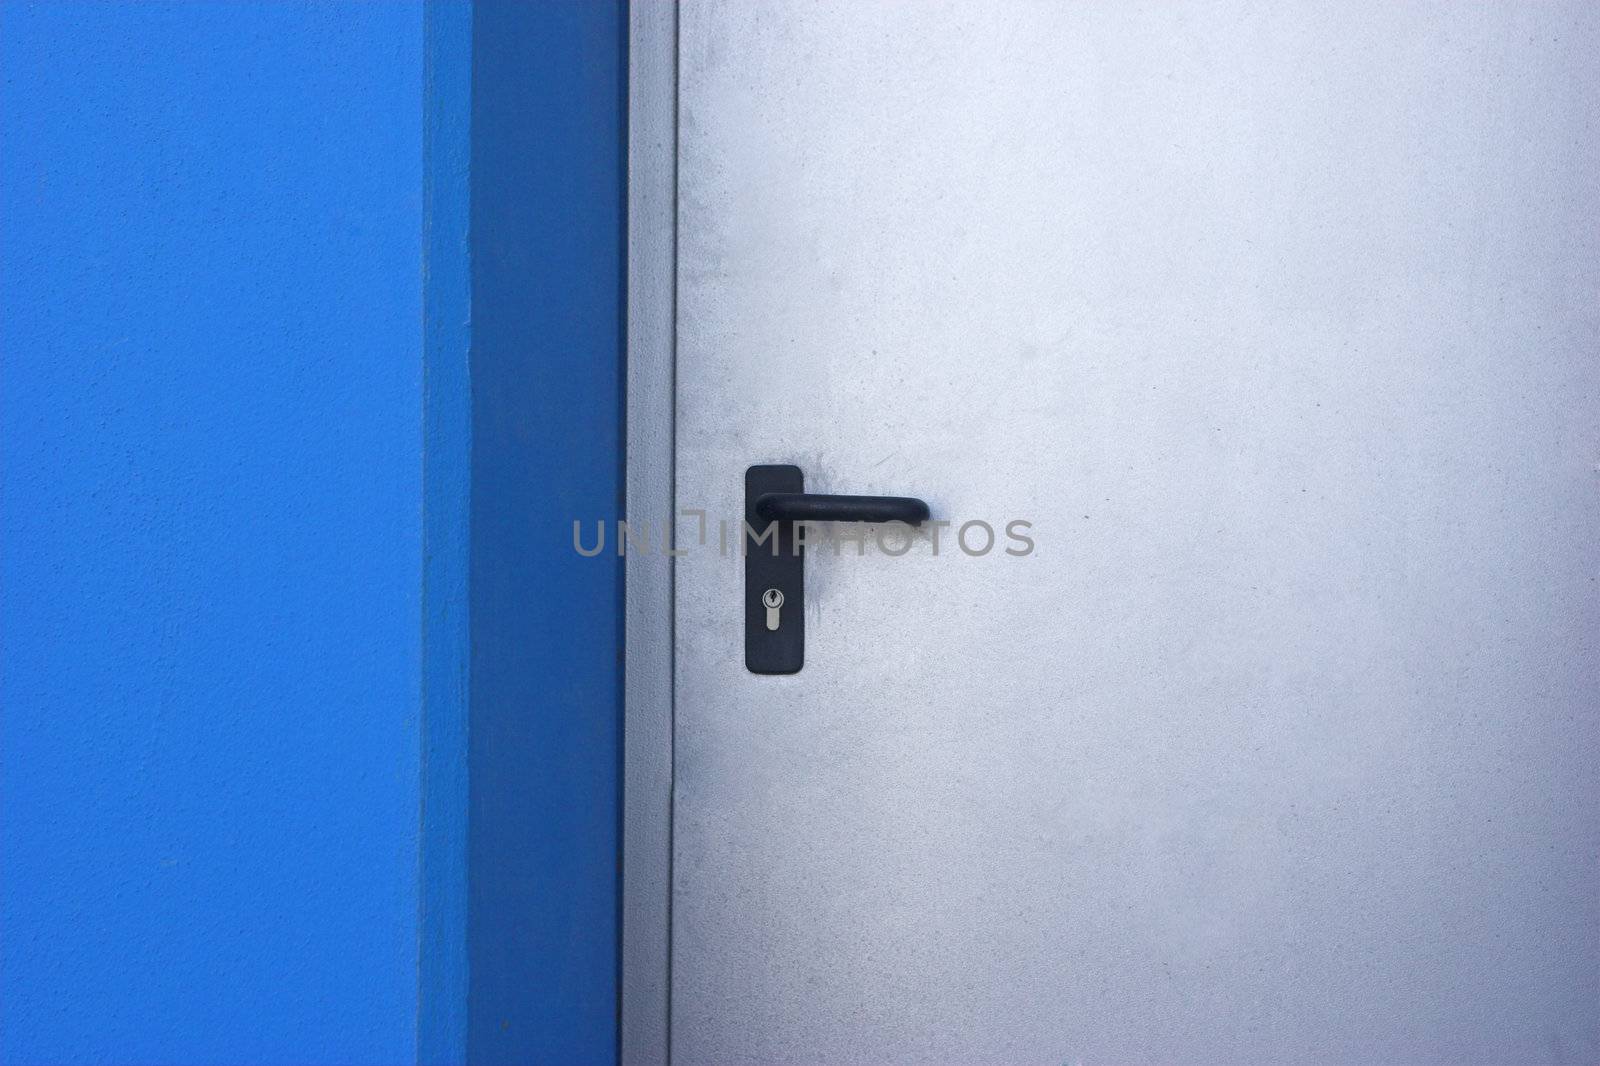 Picture of a door in a modern building with blue walls